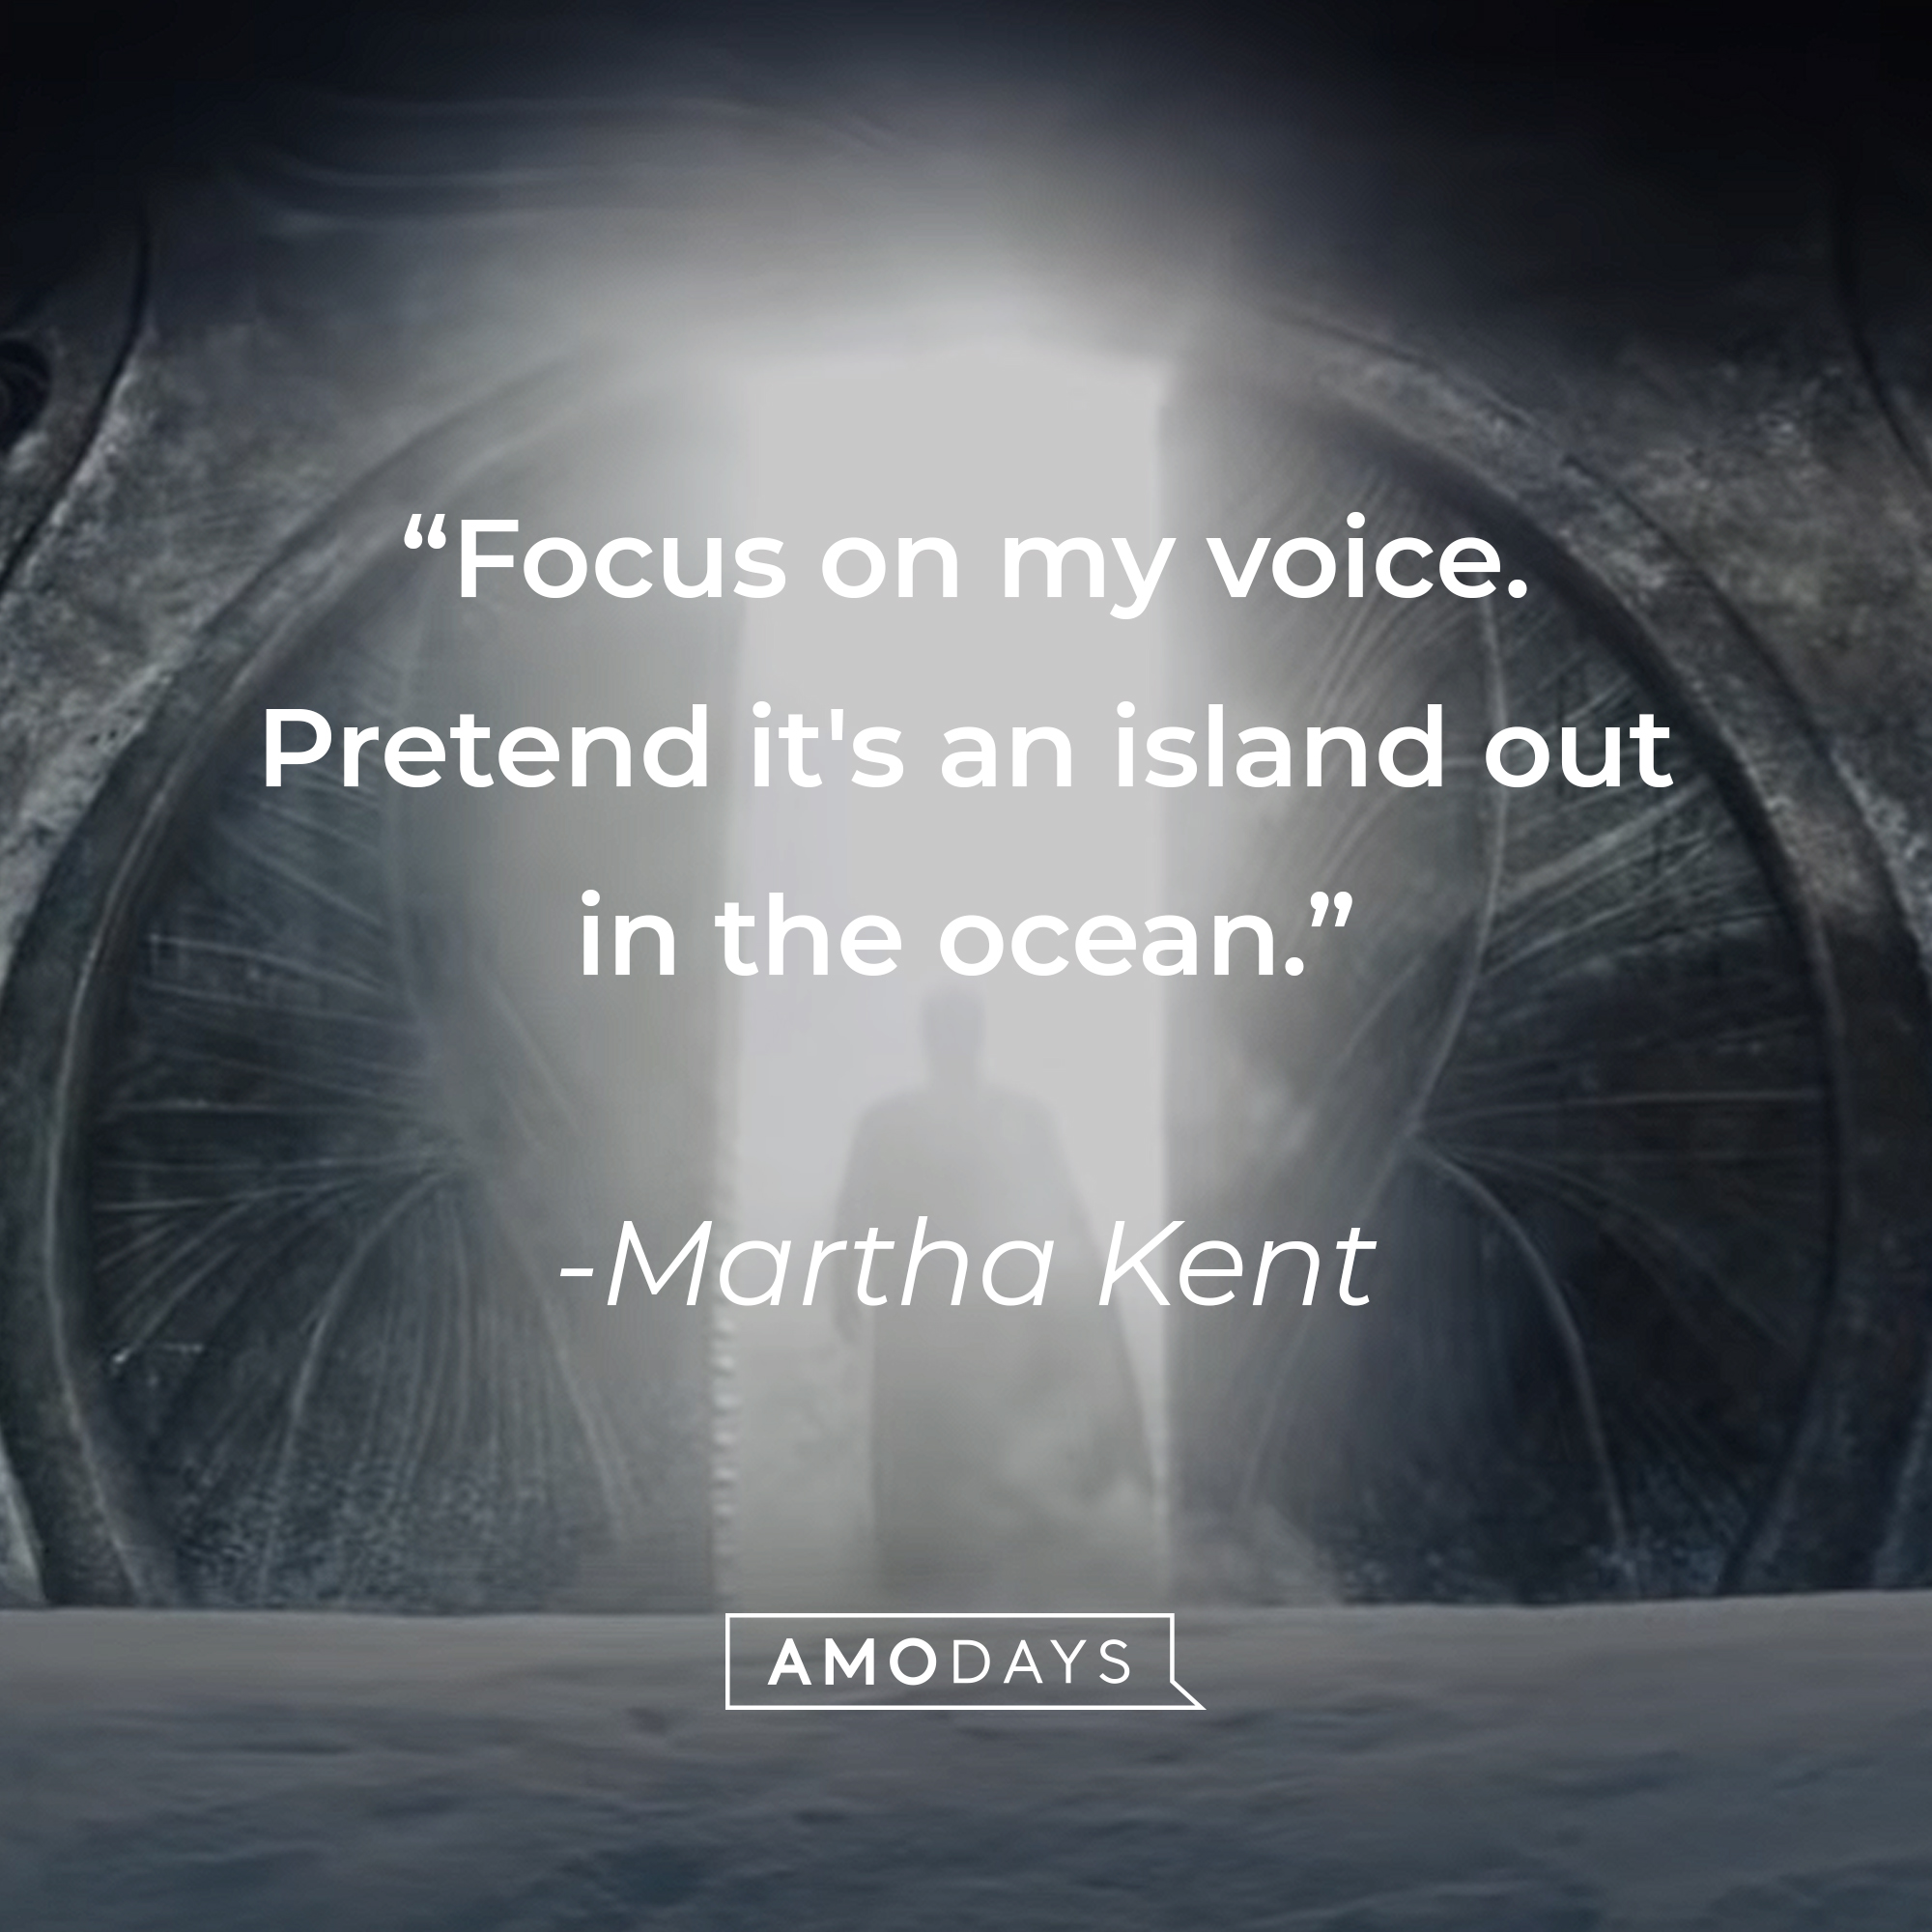 Martha Kent's quote: "Focus on my voice. Pretend it's an island out in the ocean." | Source: Youtube.com/WarnerBrosPictures